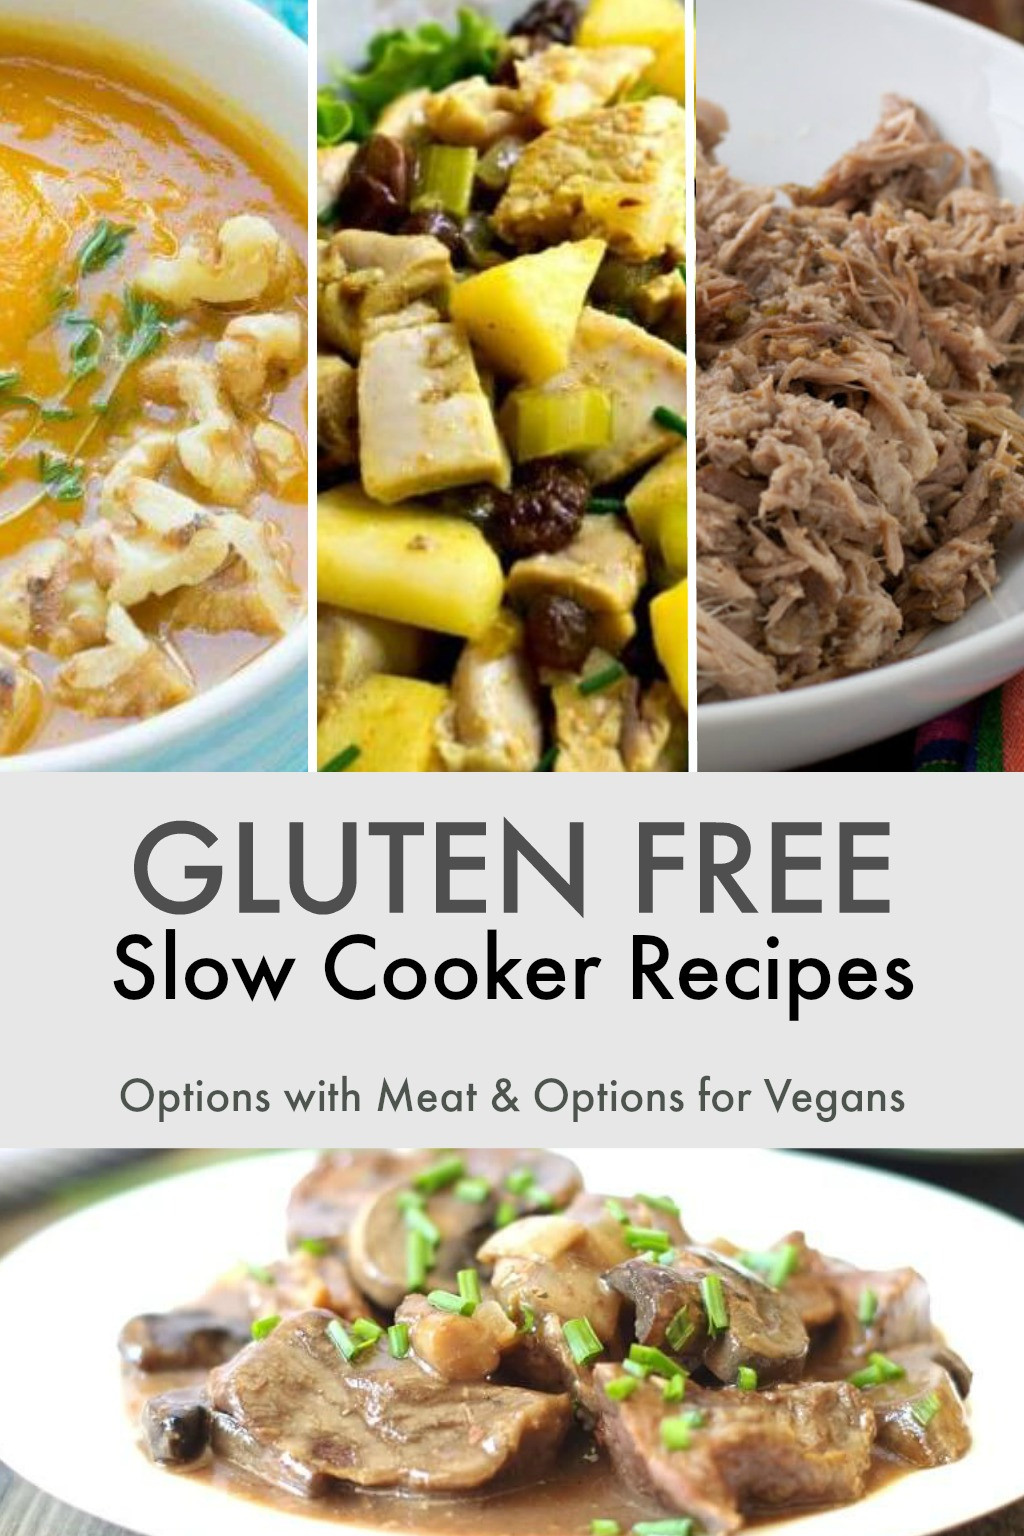 Gluten Free Dairy Free Slow Cooker Recipes
 Gluten Free Slow Cooker Recipes • Dairy Free • Easy